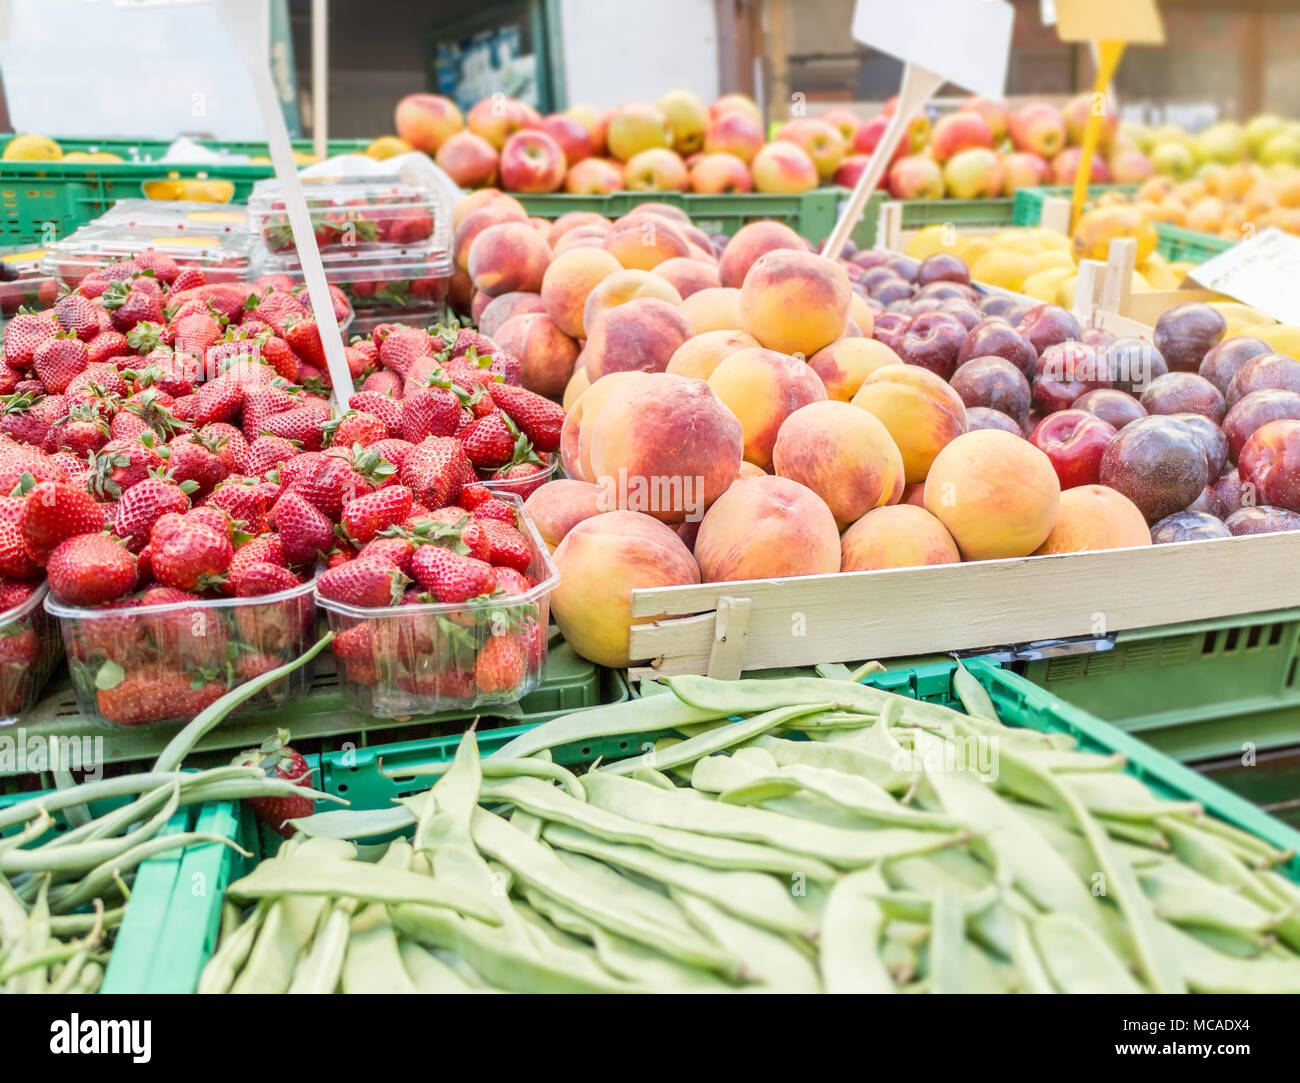 Strawberries, Peaches, plums, apples on market stand, natural daylight, farmers market Stock Photo